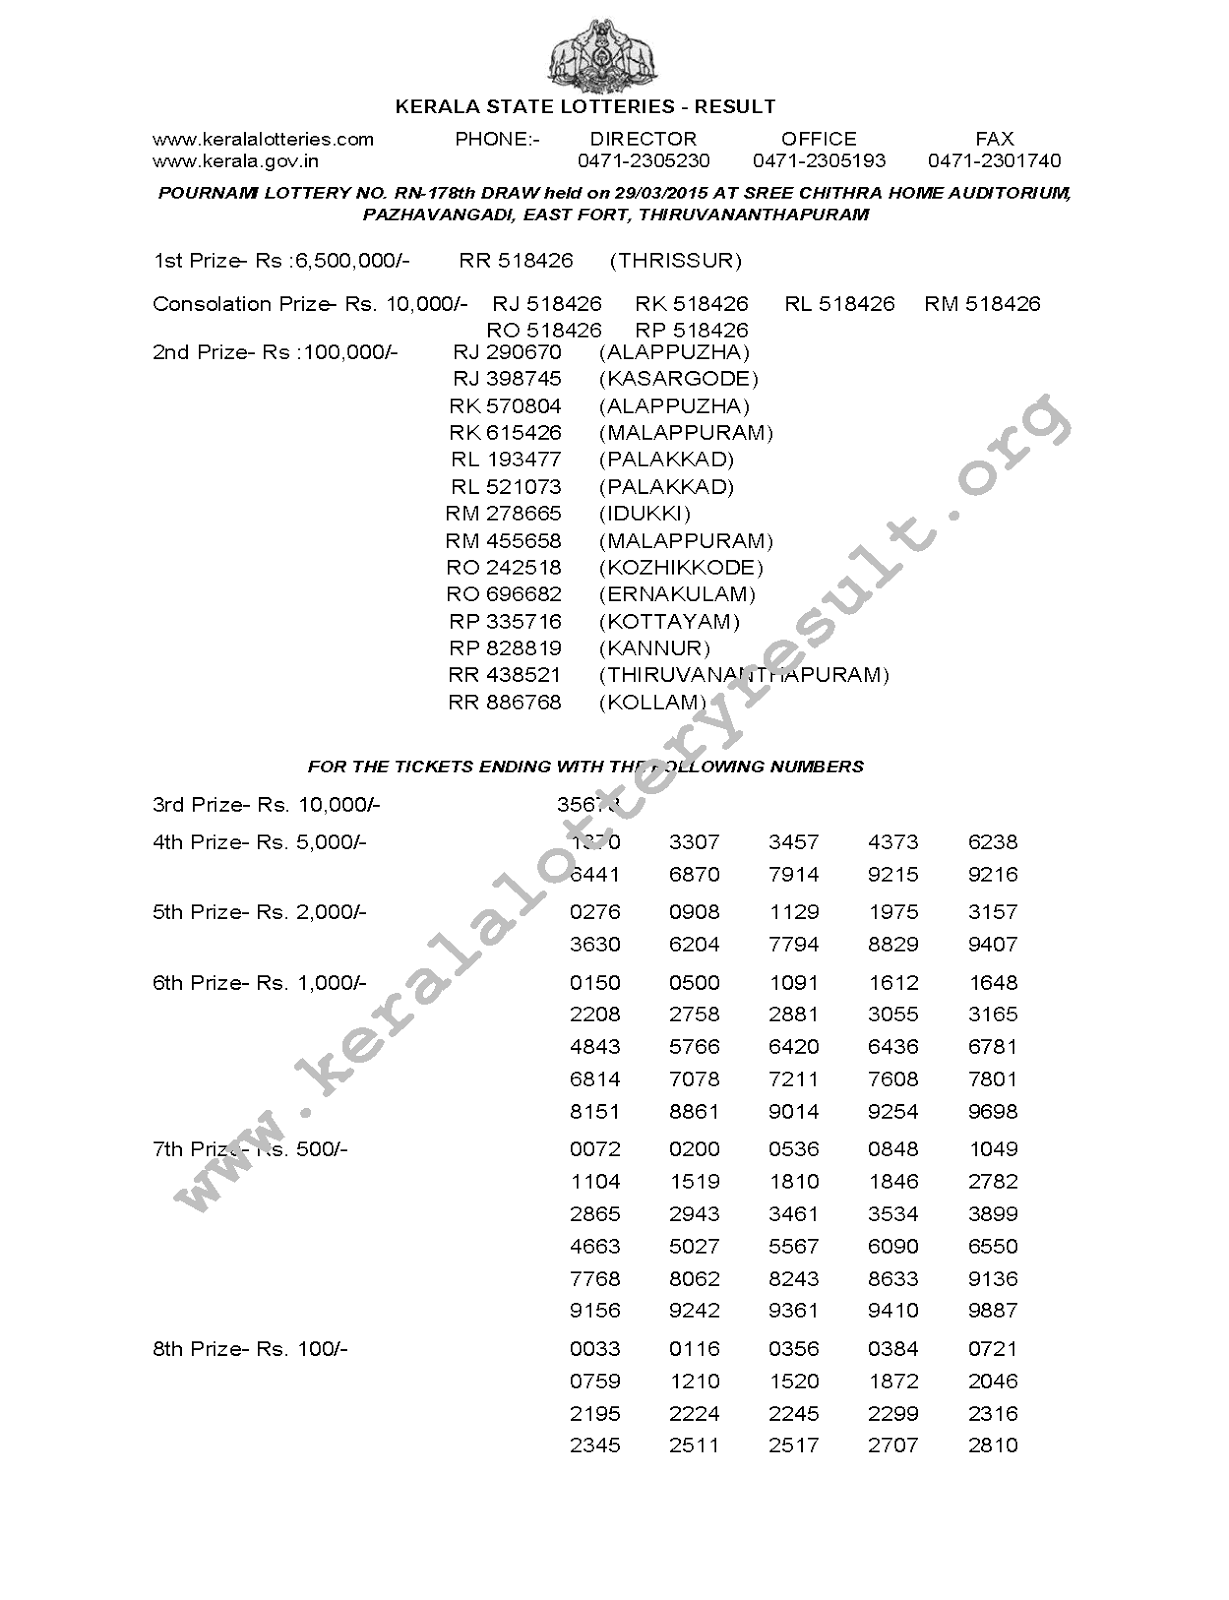 POURNAMI Lottery RN 178 Result 29-3-2015